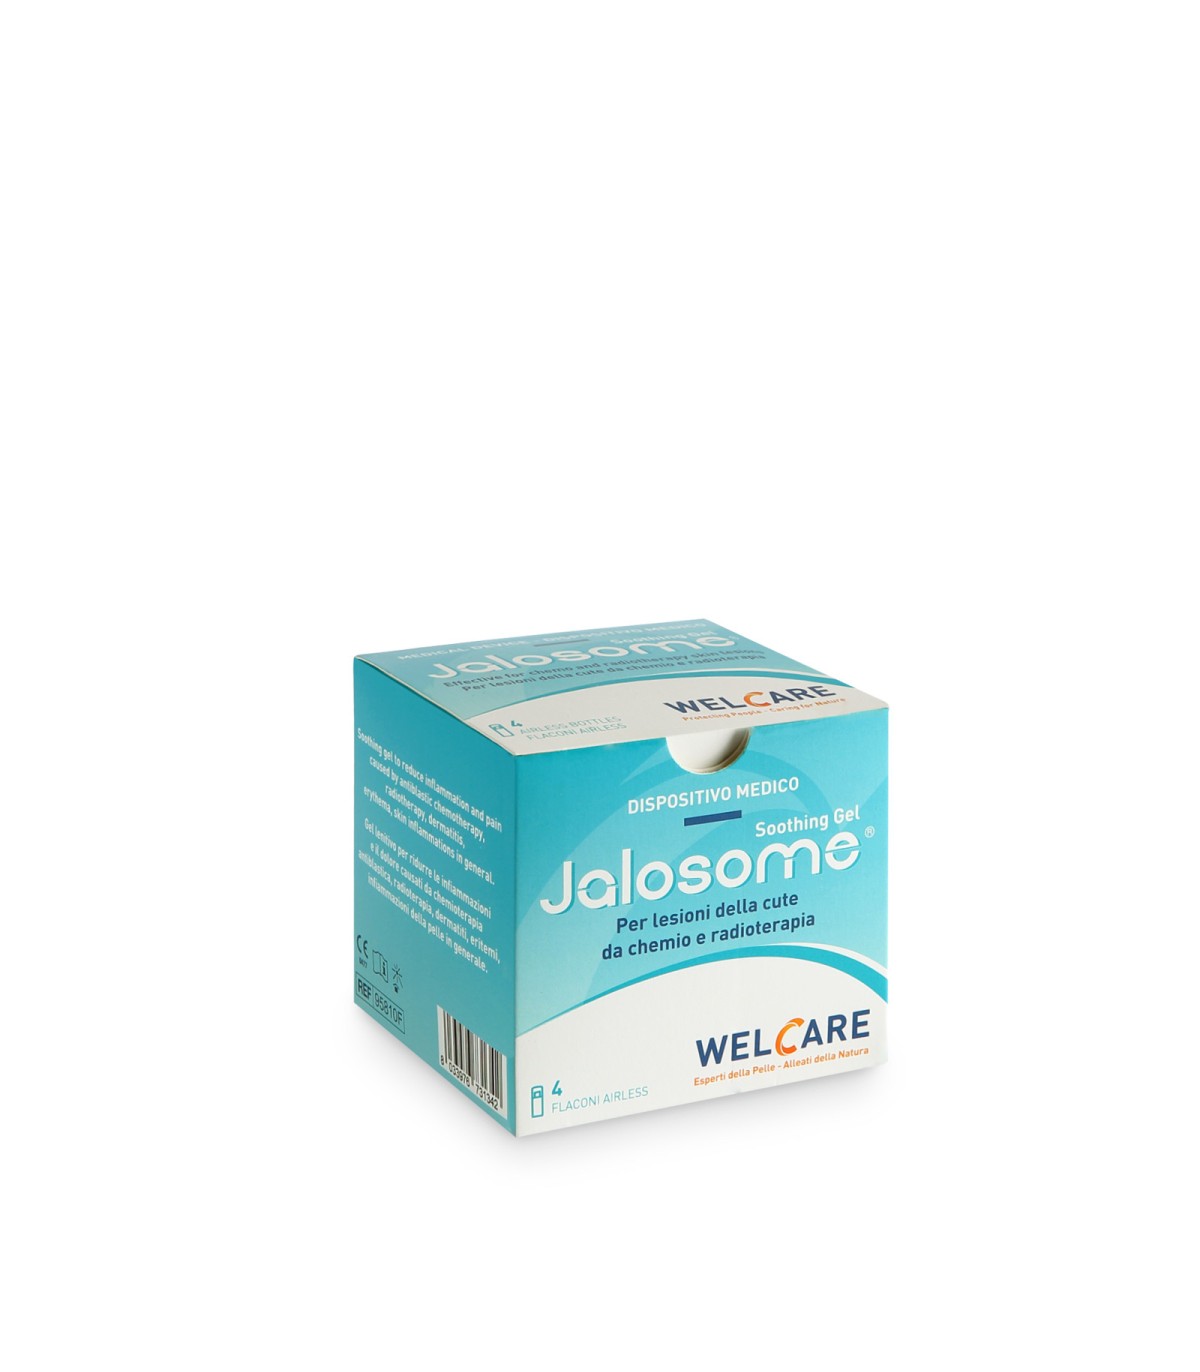 Jalosome® Soothing gel